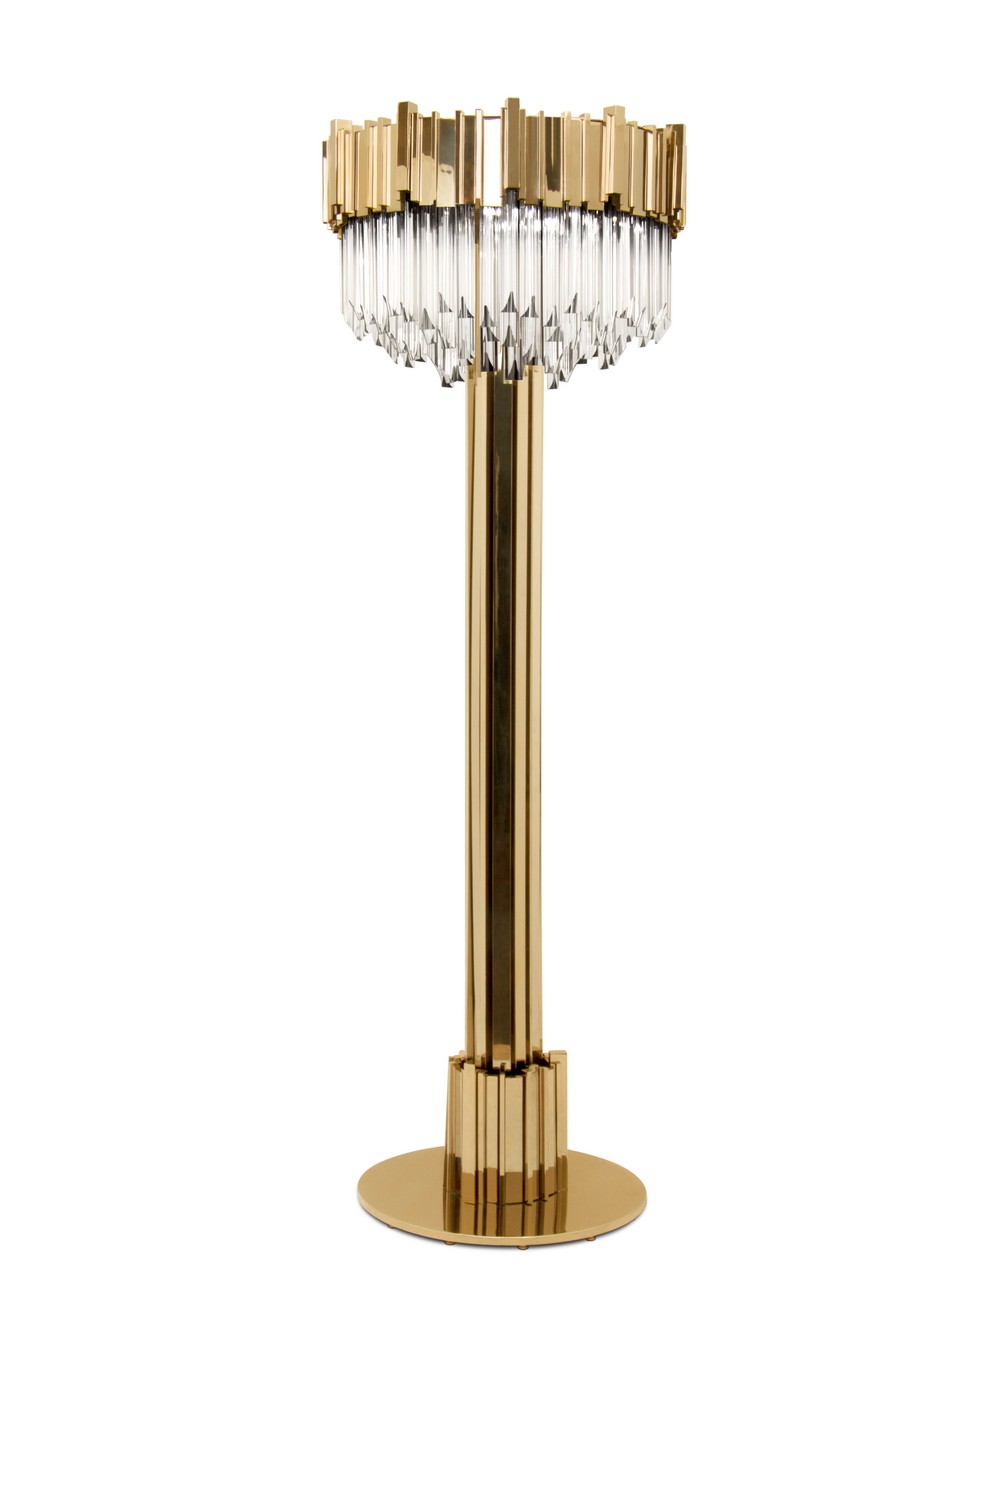 Product of the Week Empire Floor Lamp 1 1